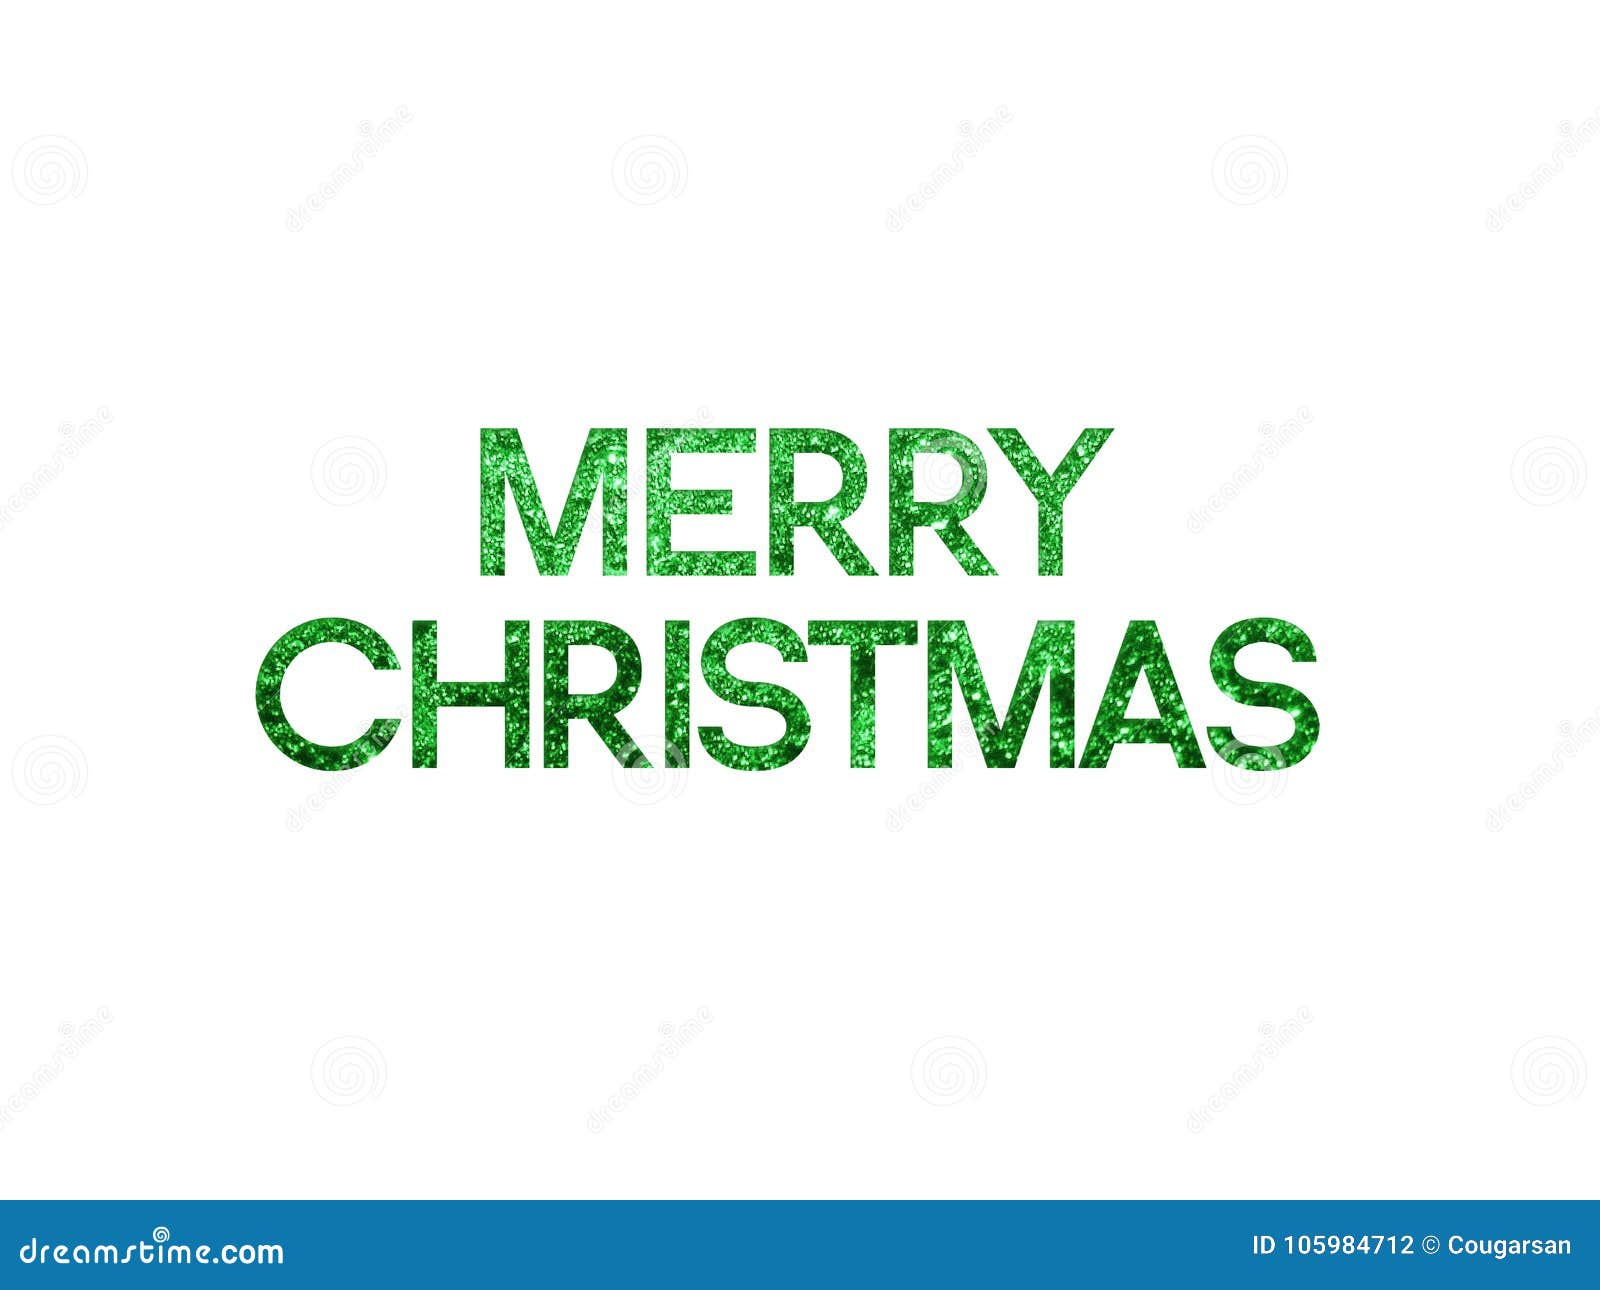 Download Green Glitter Isolated Hand Writing Word MERRY CHRISTMAS Stock Illustration Illustration of element